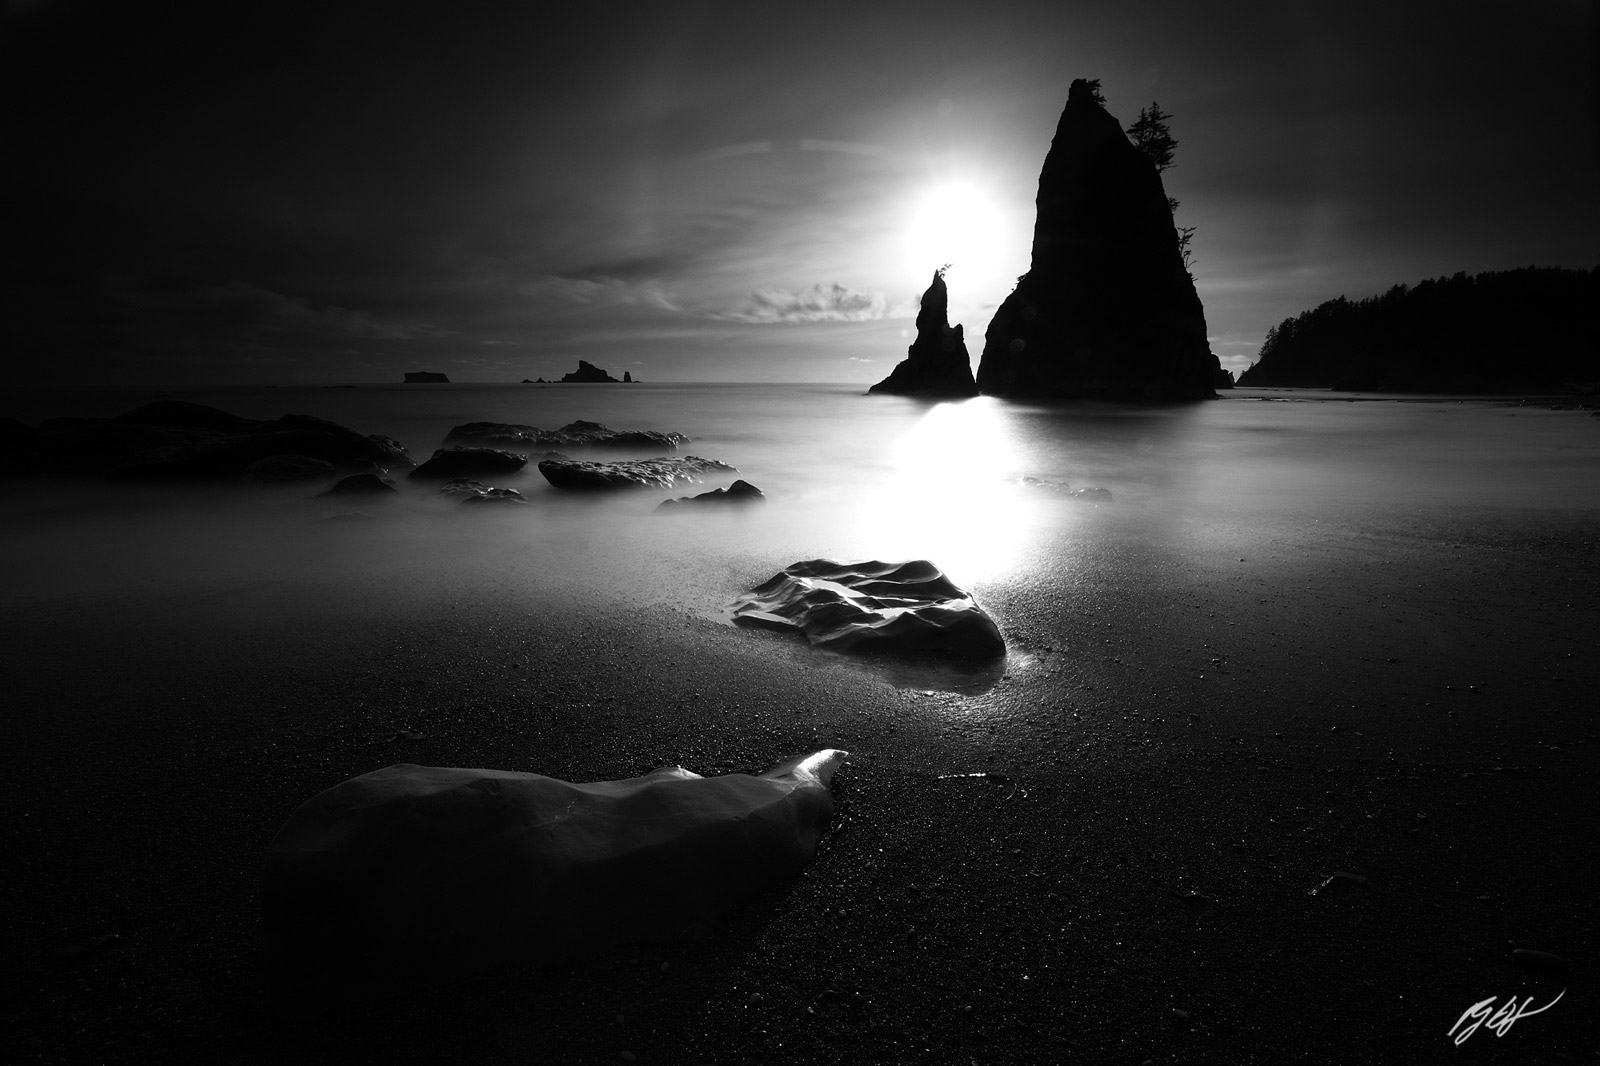 Sunset and Split rock from Rialto Beach in Olympic National Park in Washington